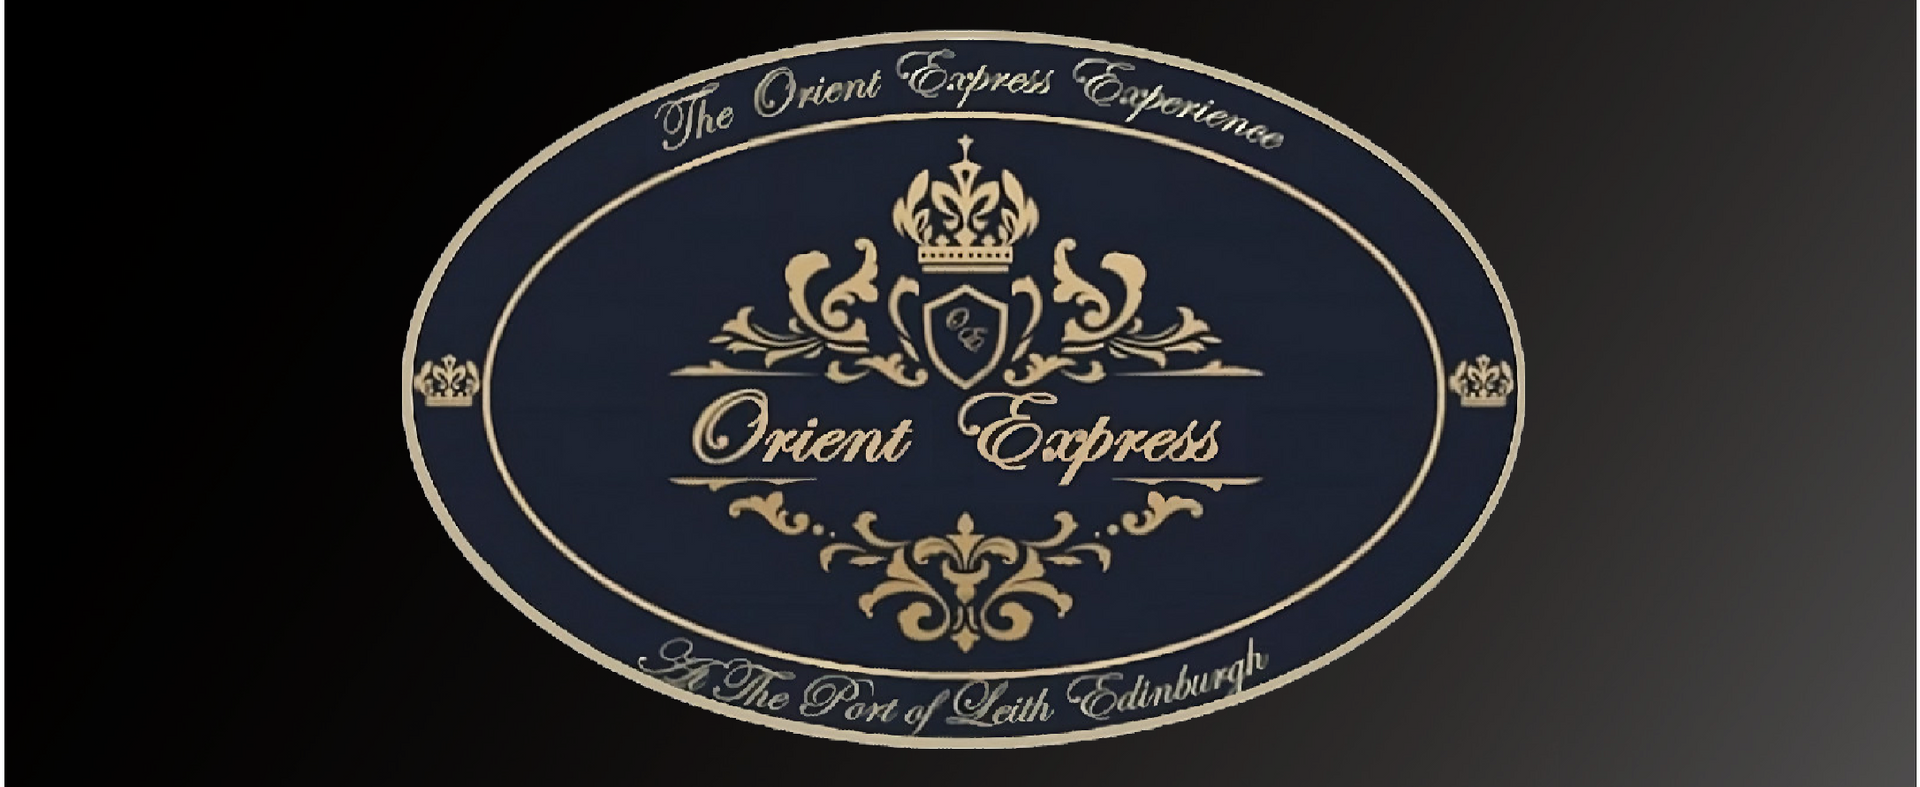 Leith Orient Express Experience logo www.completelynormalmedia.com